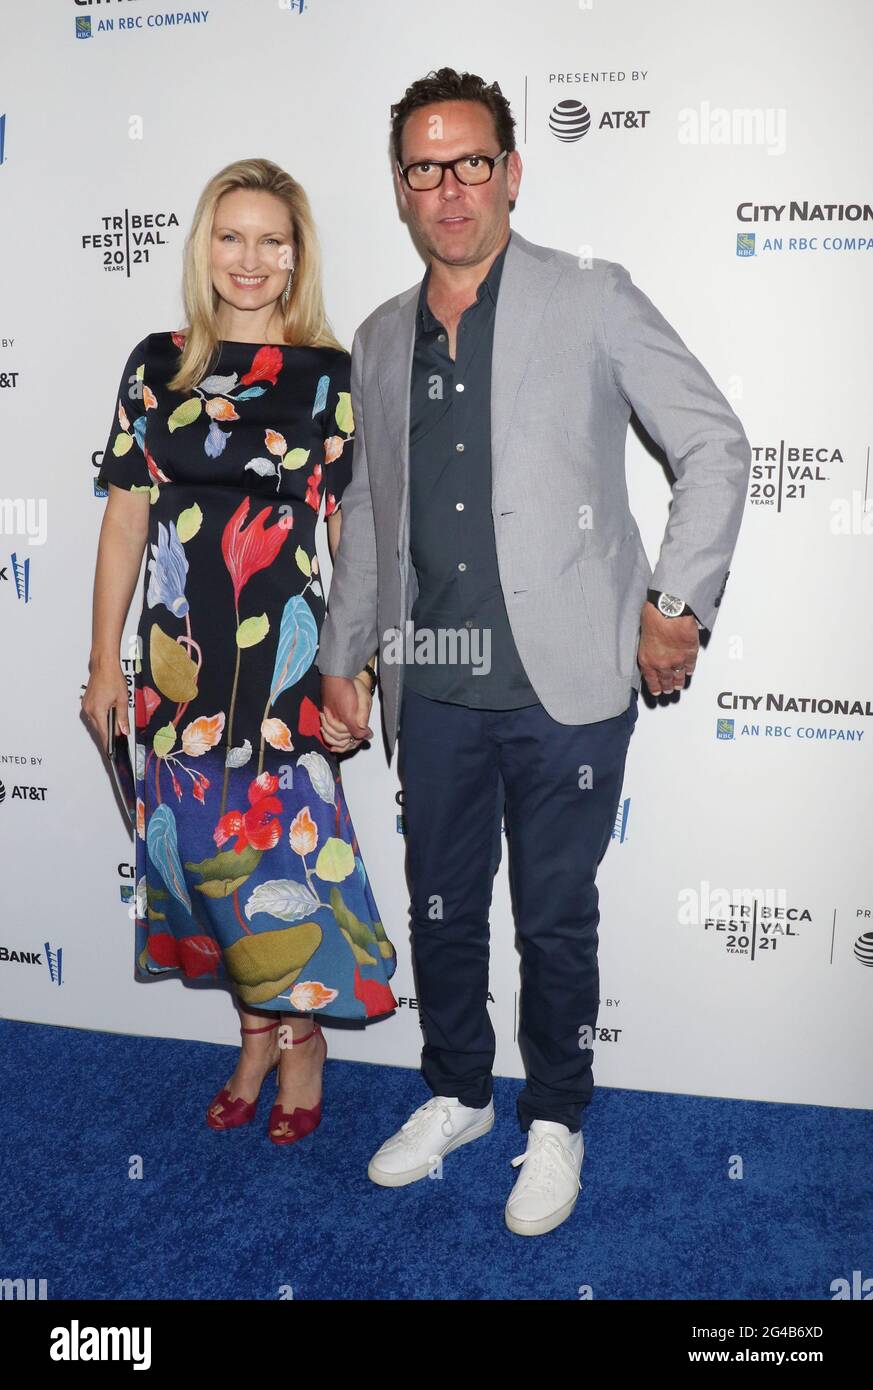 NEW YORK, NY- JUNE 19: James Murdoch, Kathryn Hufschmid at the Tribeca Film Festival Closing Night Celebration premiere of Untitled: Dave Chappeile Documentary at Radio City Music Hall in New York City on June 19, 2021. Credit: RW/MediaPunch Stock Photo